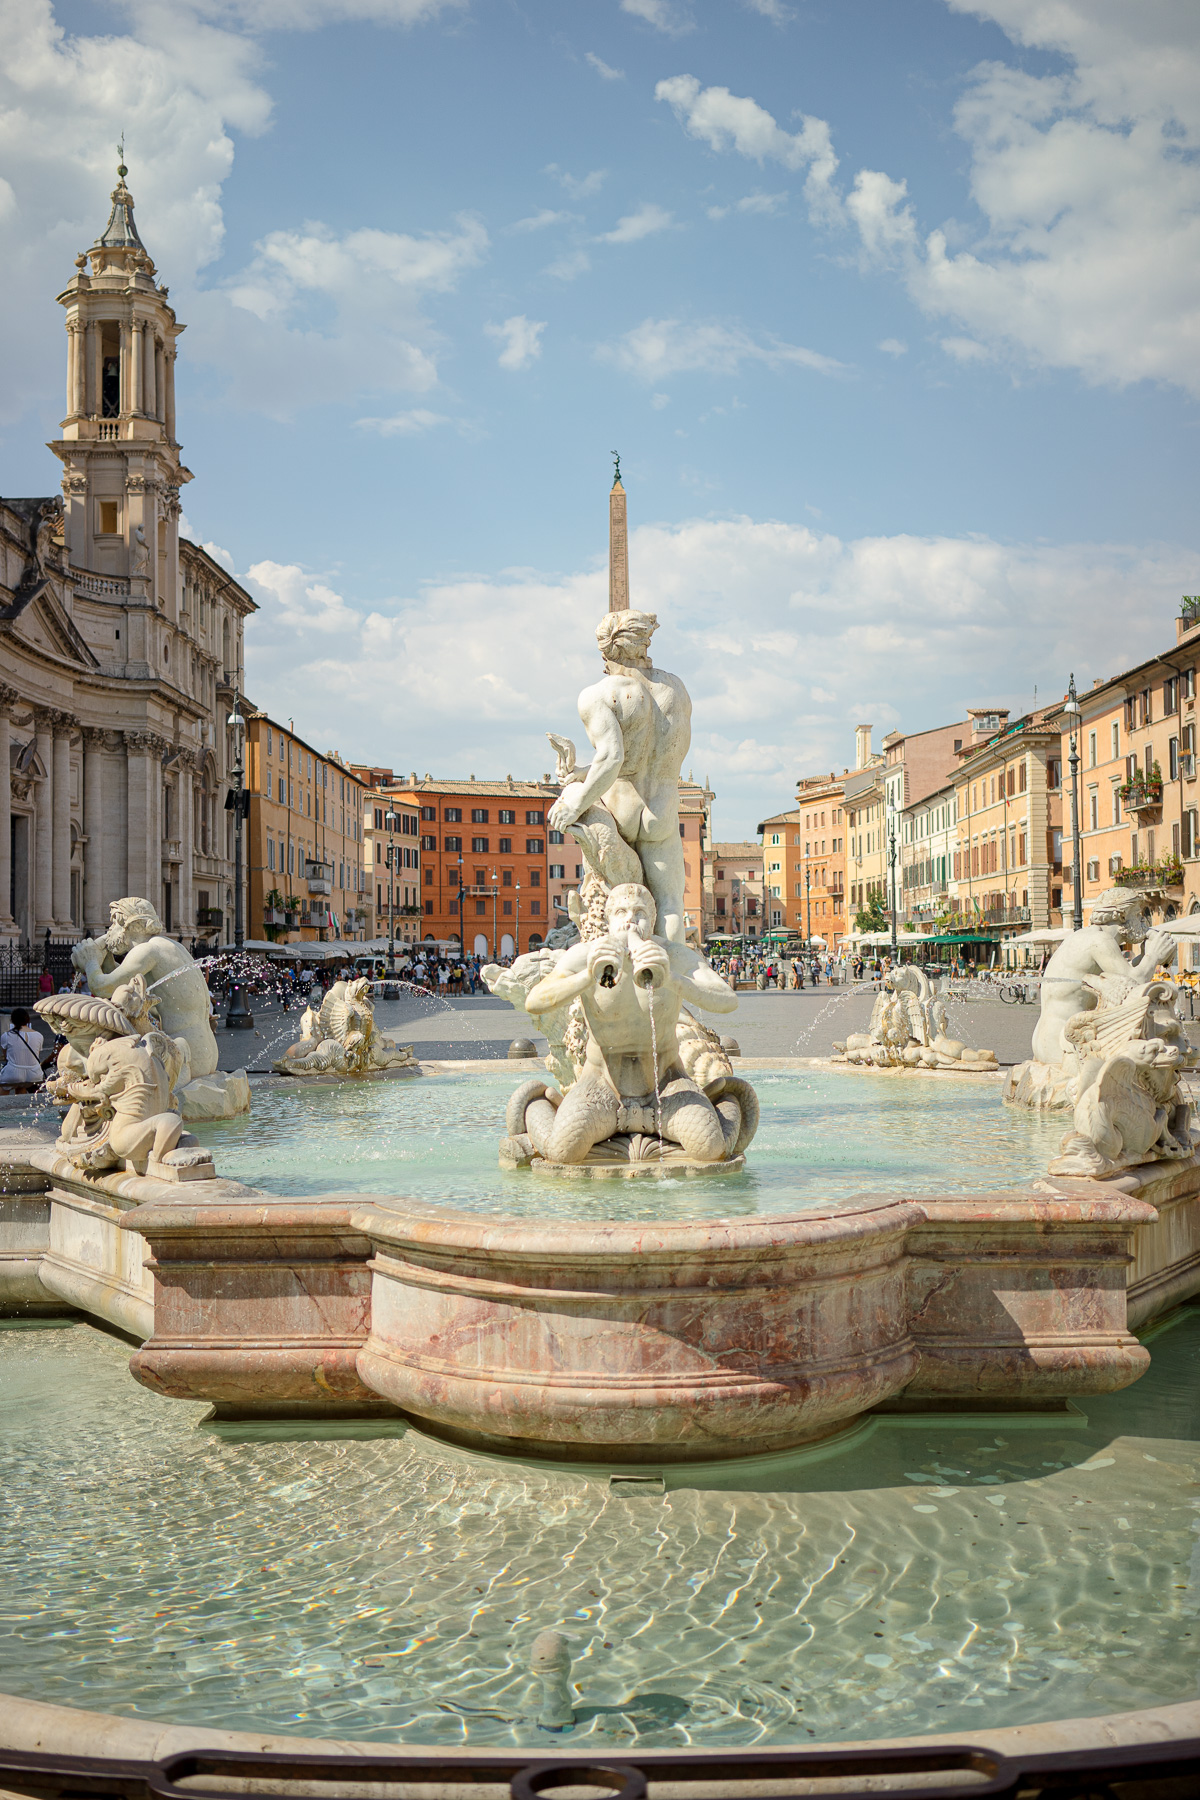 Piazza Navona in Rome, with its beautiful fountains